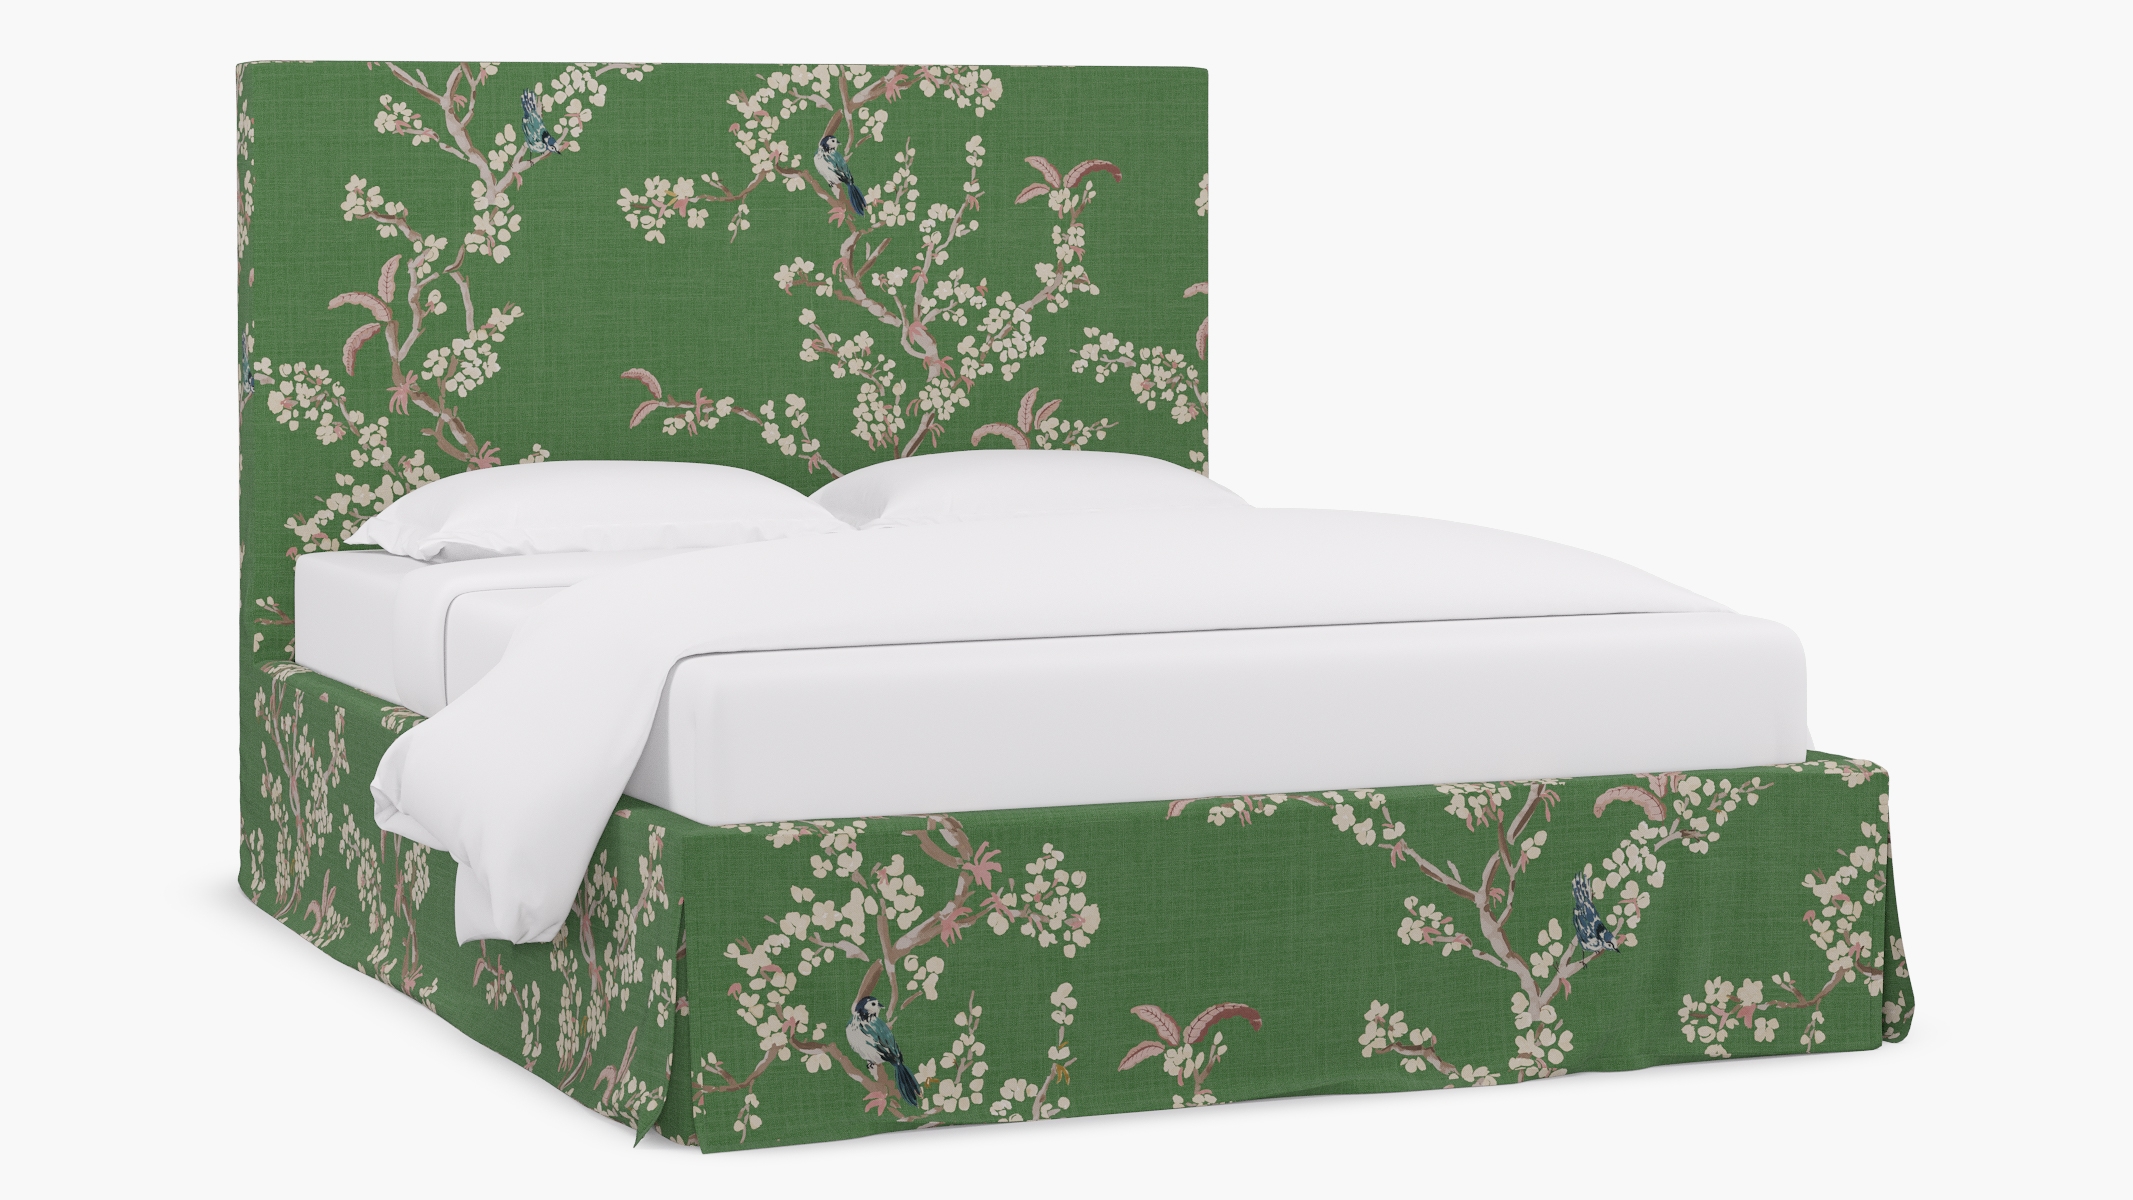 Slipcovered Bed, Jade Cherry Blossom, Queen - Image 1